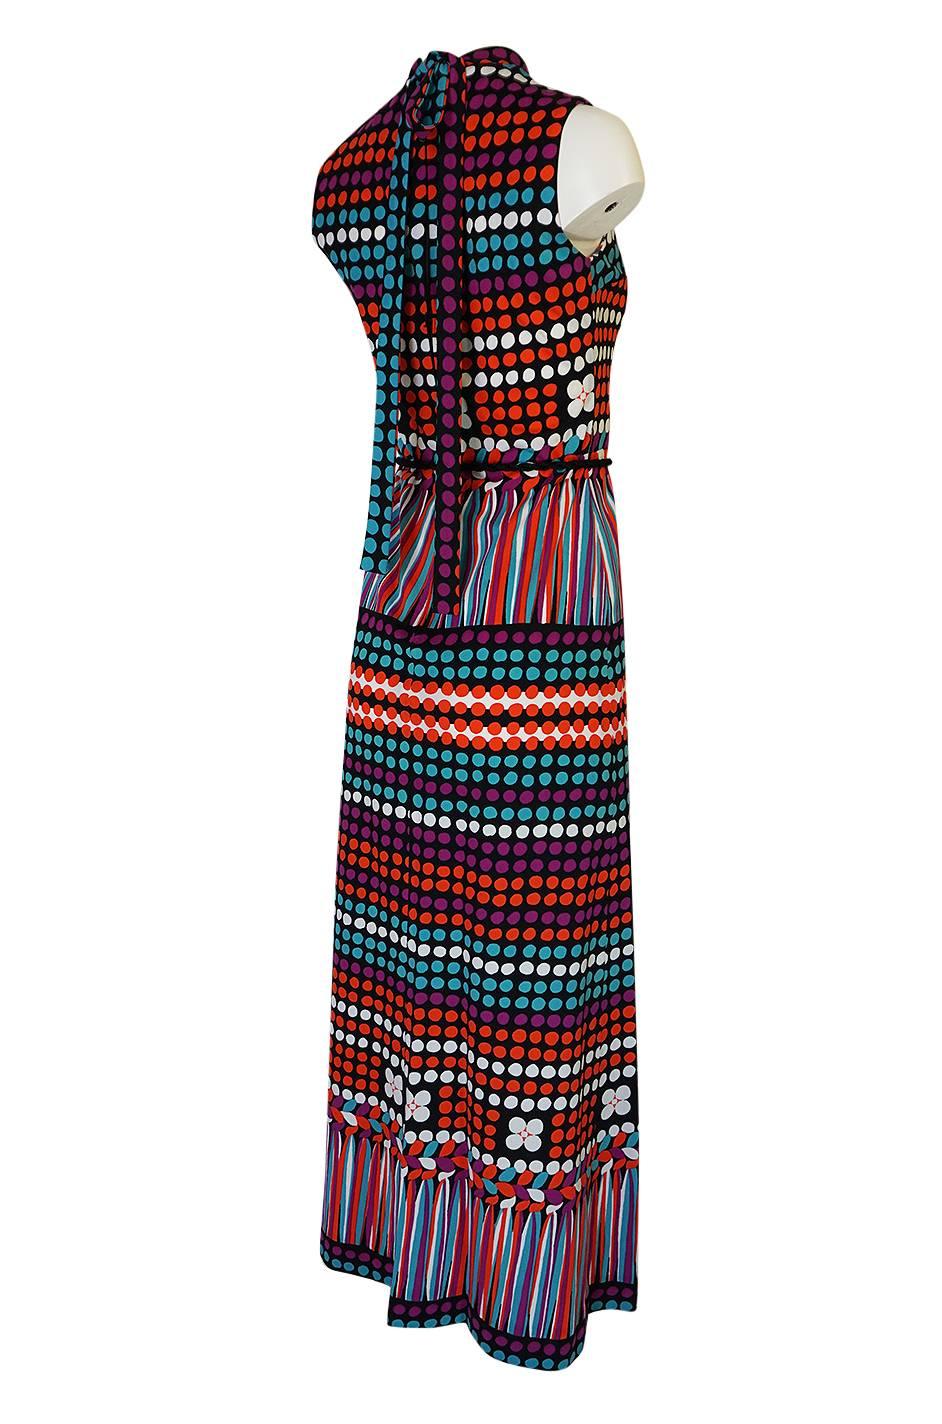 This vintage Lanvin dress has a bright color and print combination on a black base. The jersey fabric it is made of was considered one of the new 